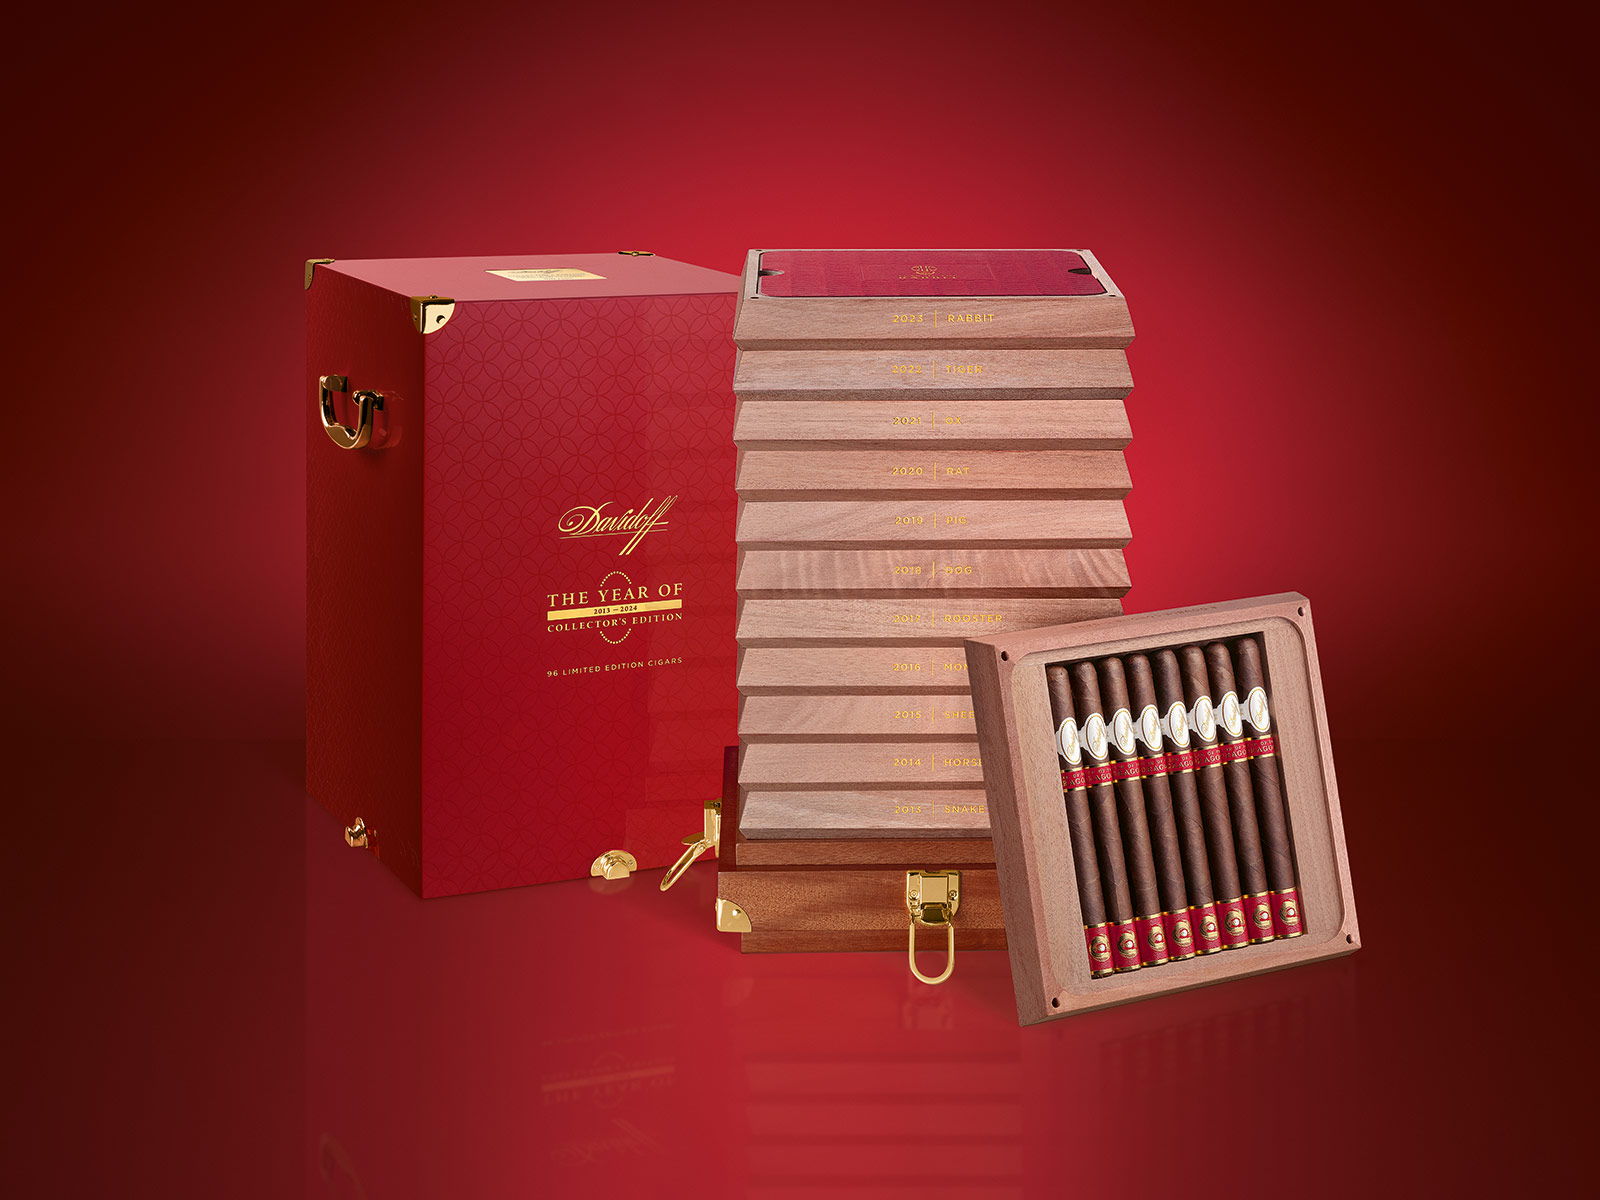 The Davidoff The Year of Collector’s Edition consisting of its stacked wooden trays and a striking red casing.